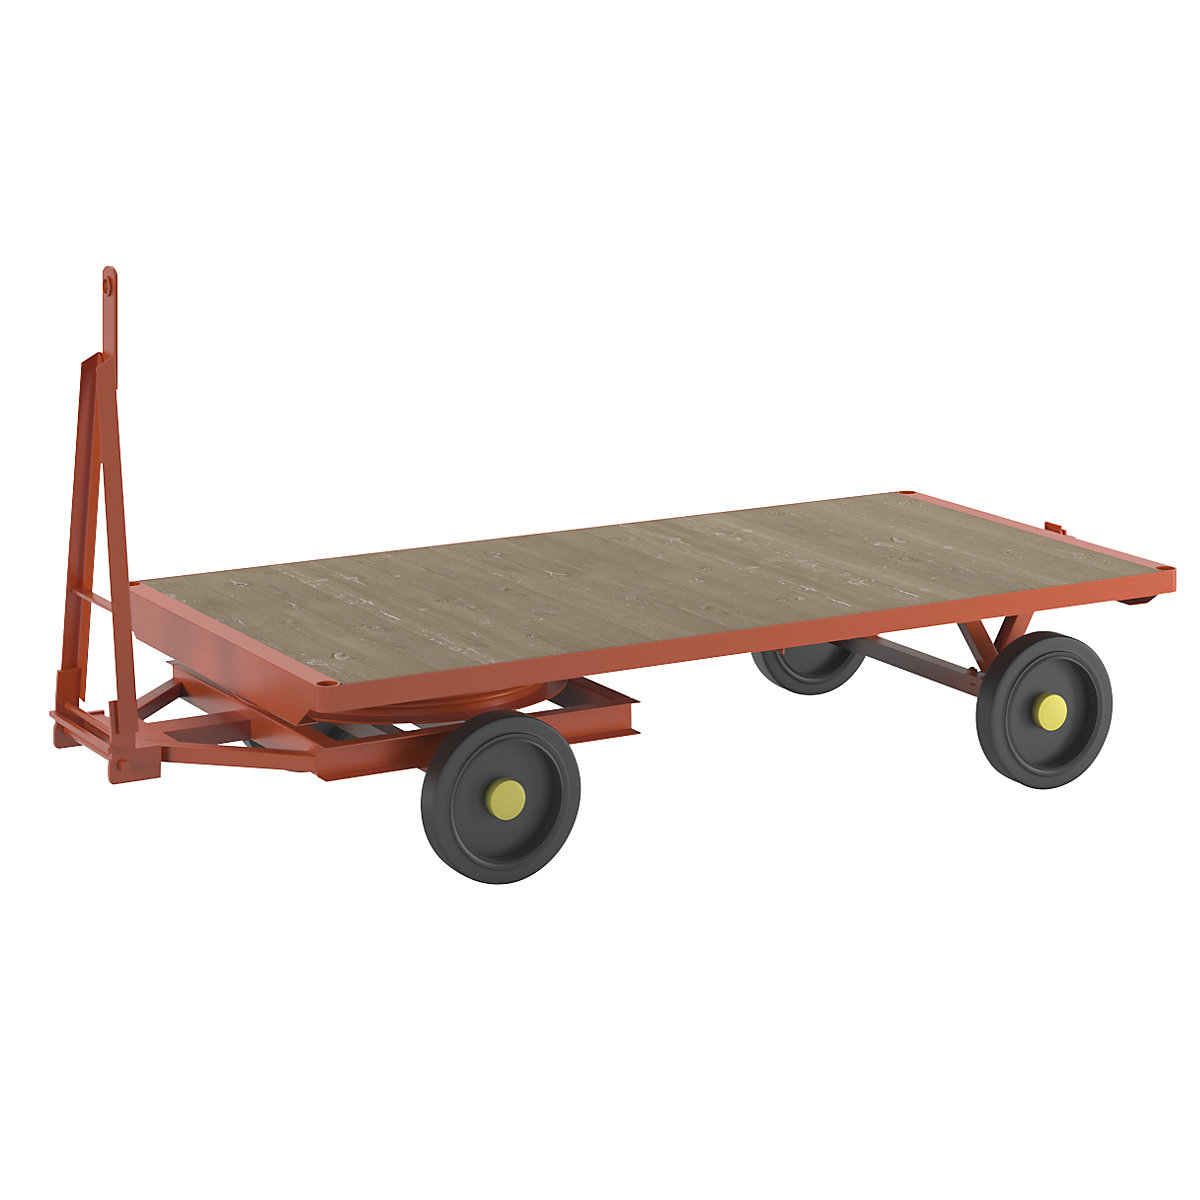 Trailer, 2-wheel turntable steering, max. load 2 t, platform 2.5 x 1.25 m, solid rubber tyres-1